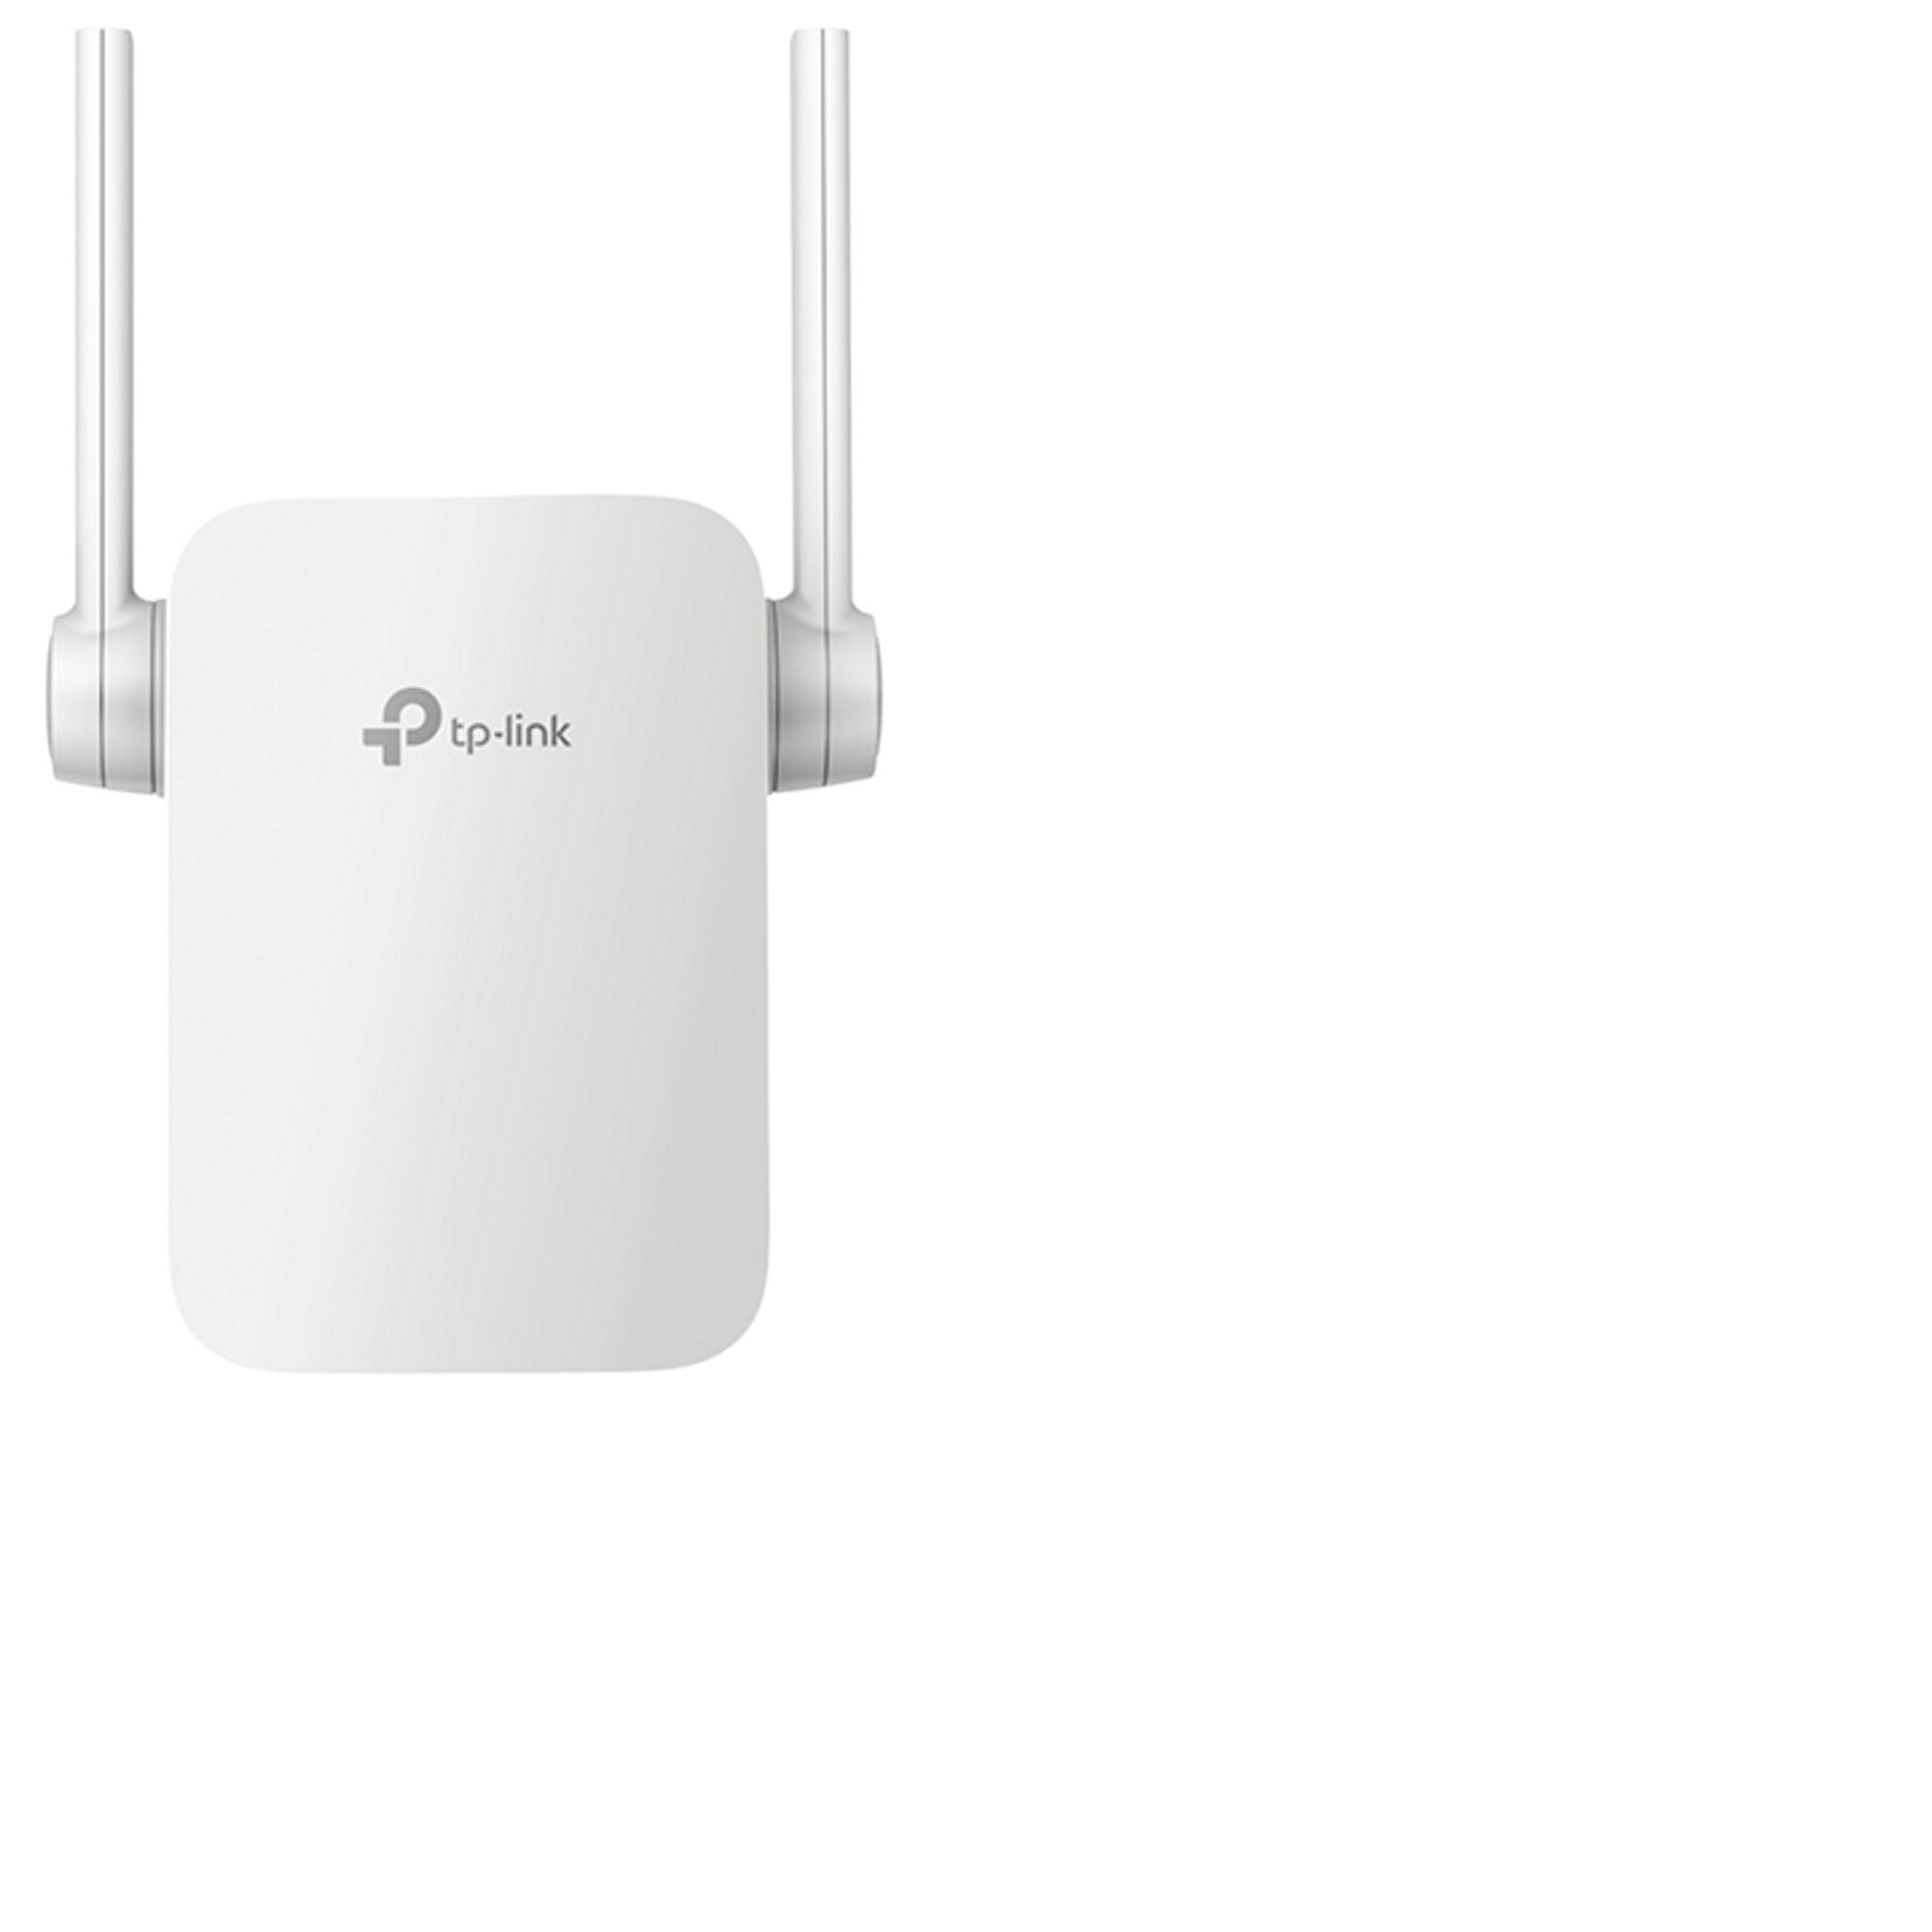 Repetidor WiFi TP-LINK AC1200 dualband